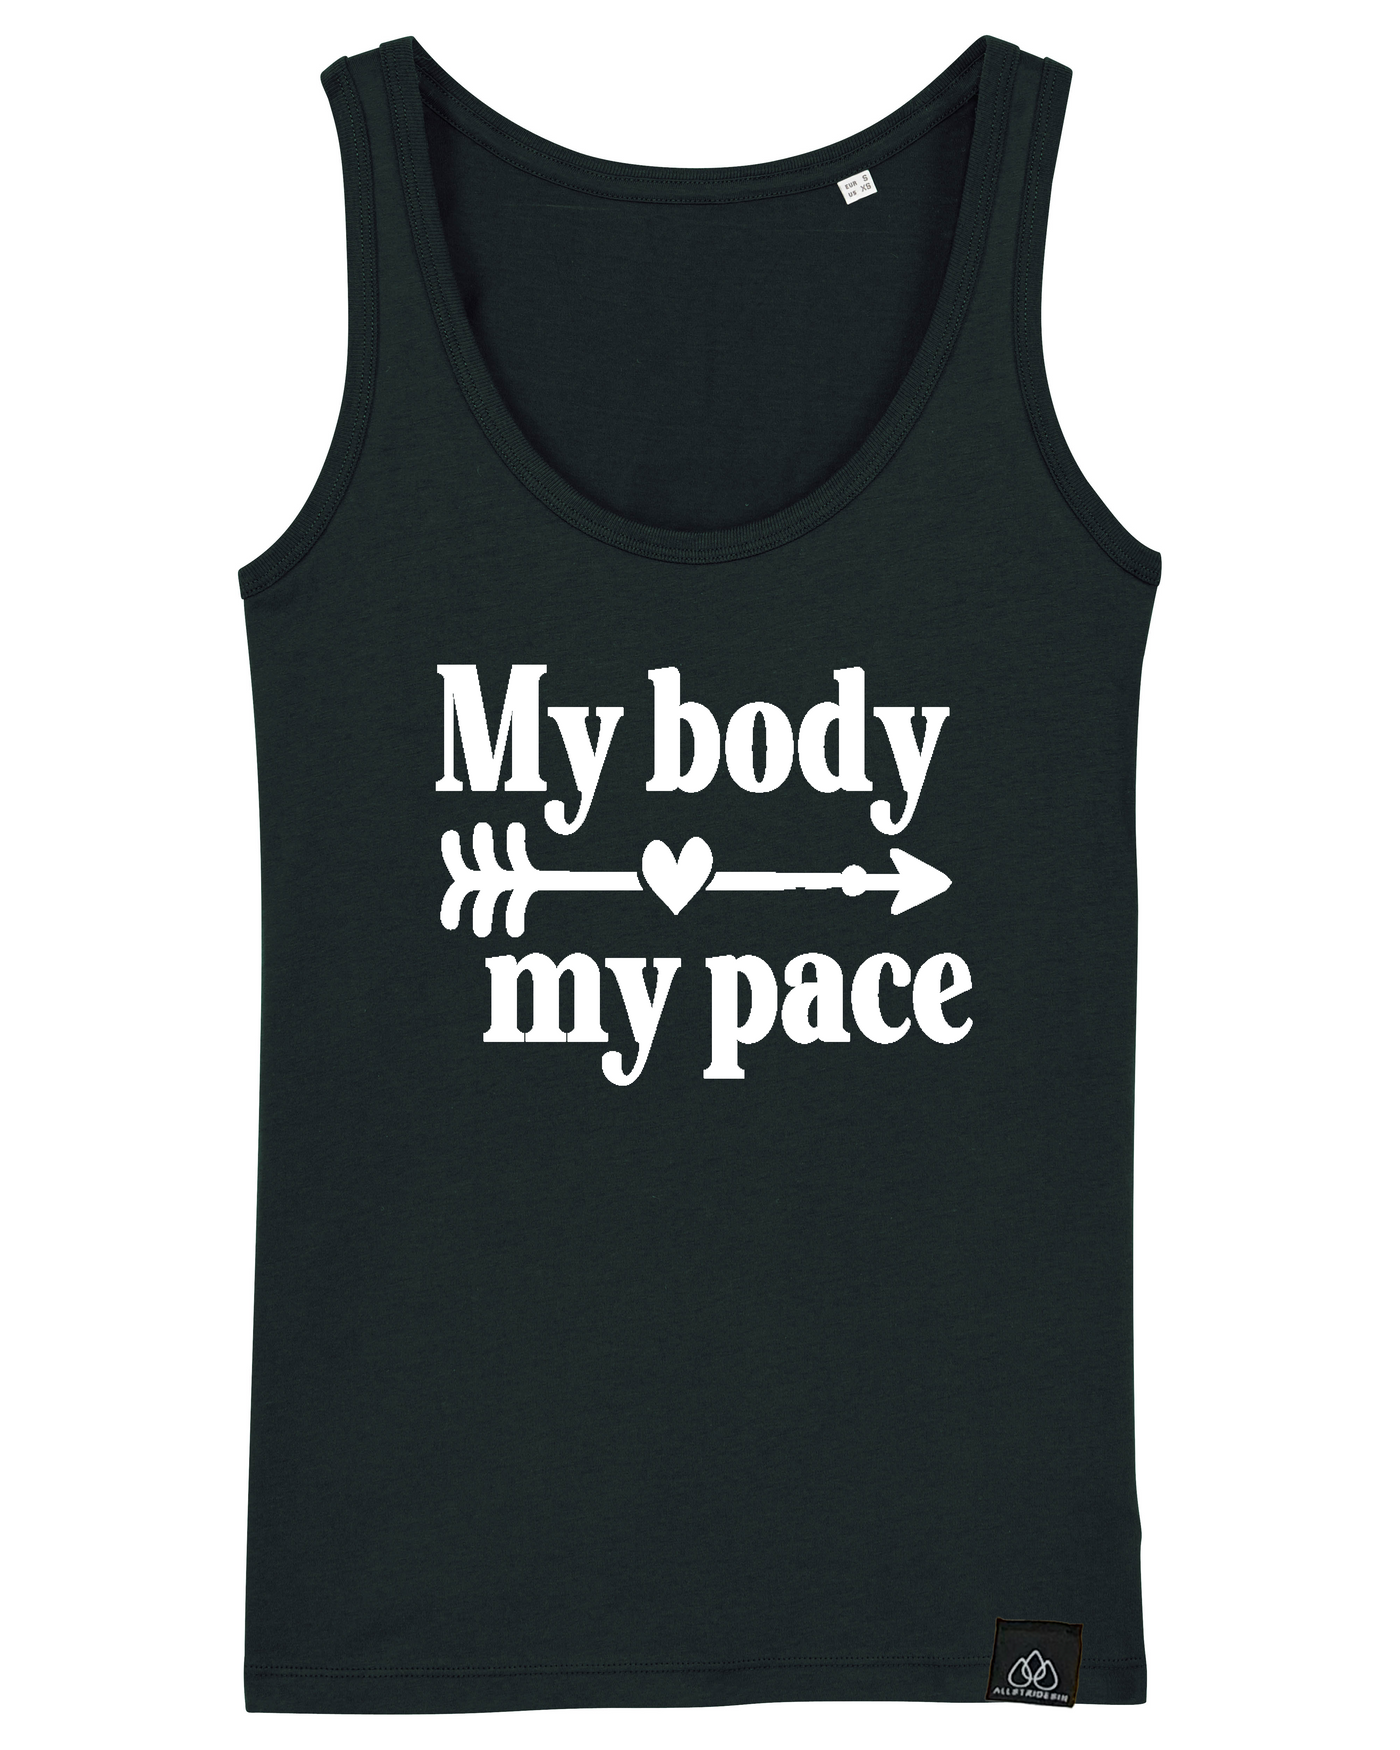 MY BODY MY PACE - LADY TANK TOP | ALLSTRIDESIN®